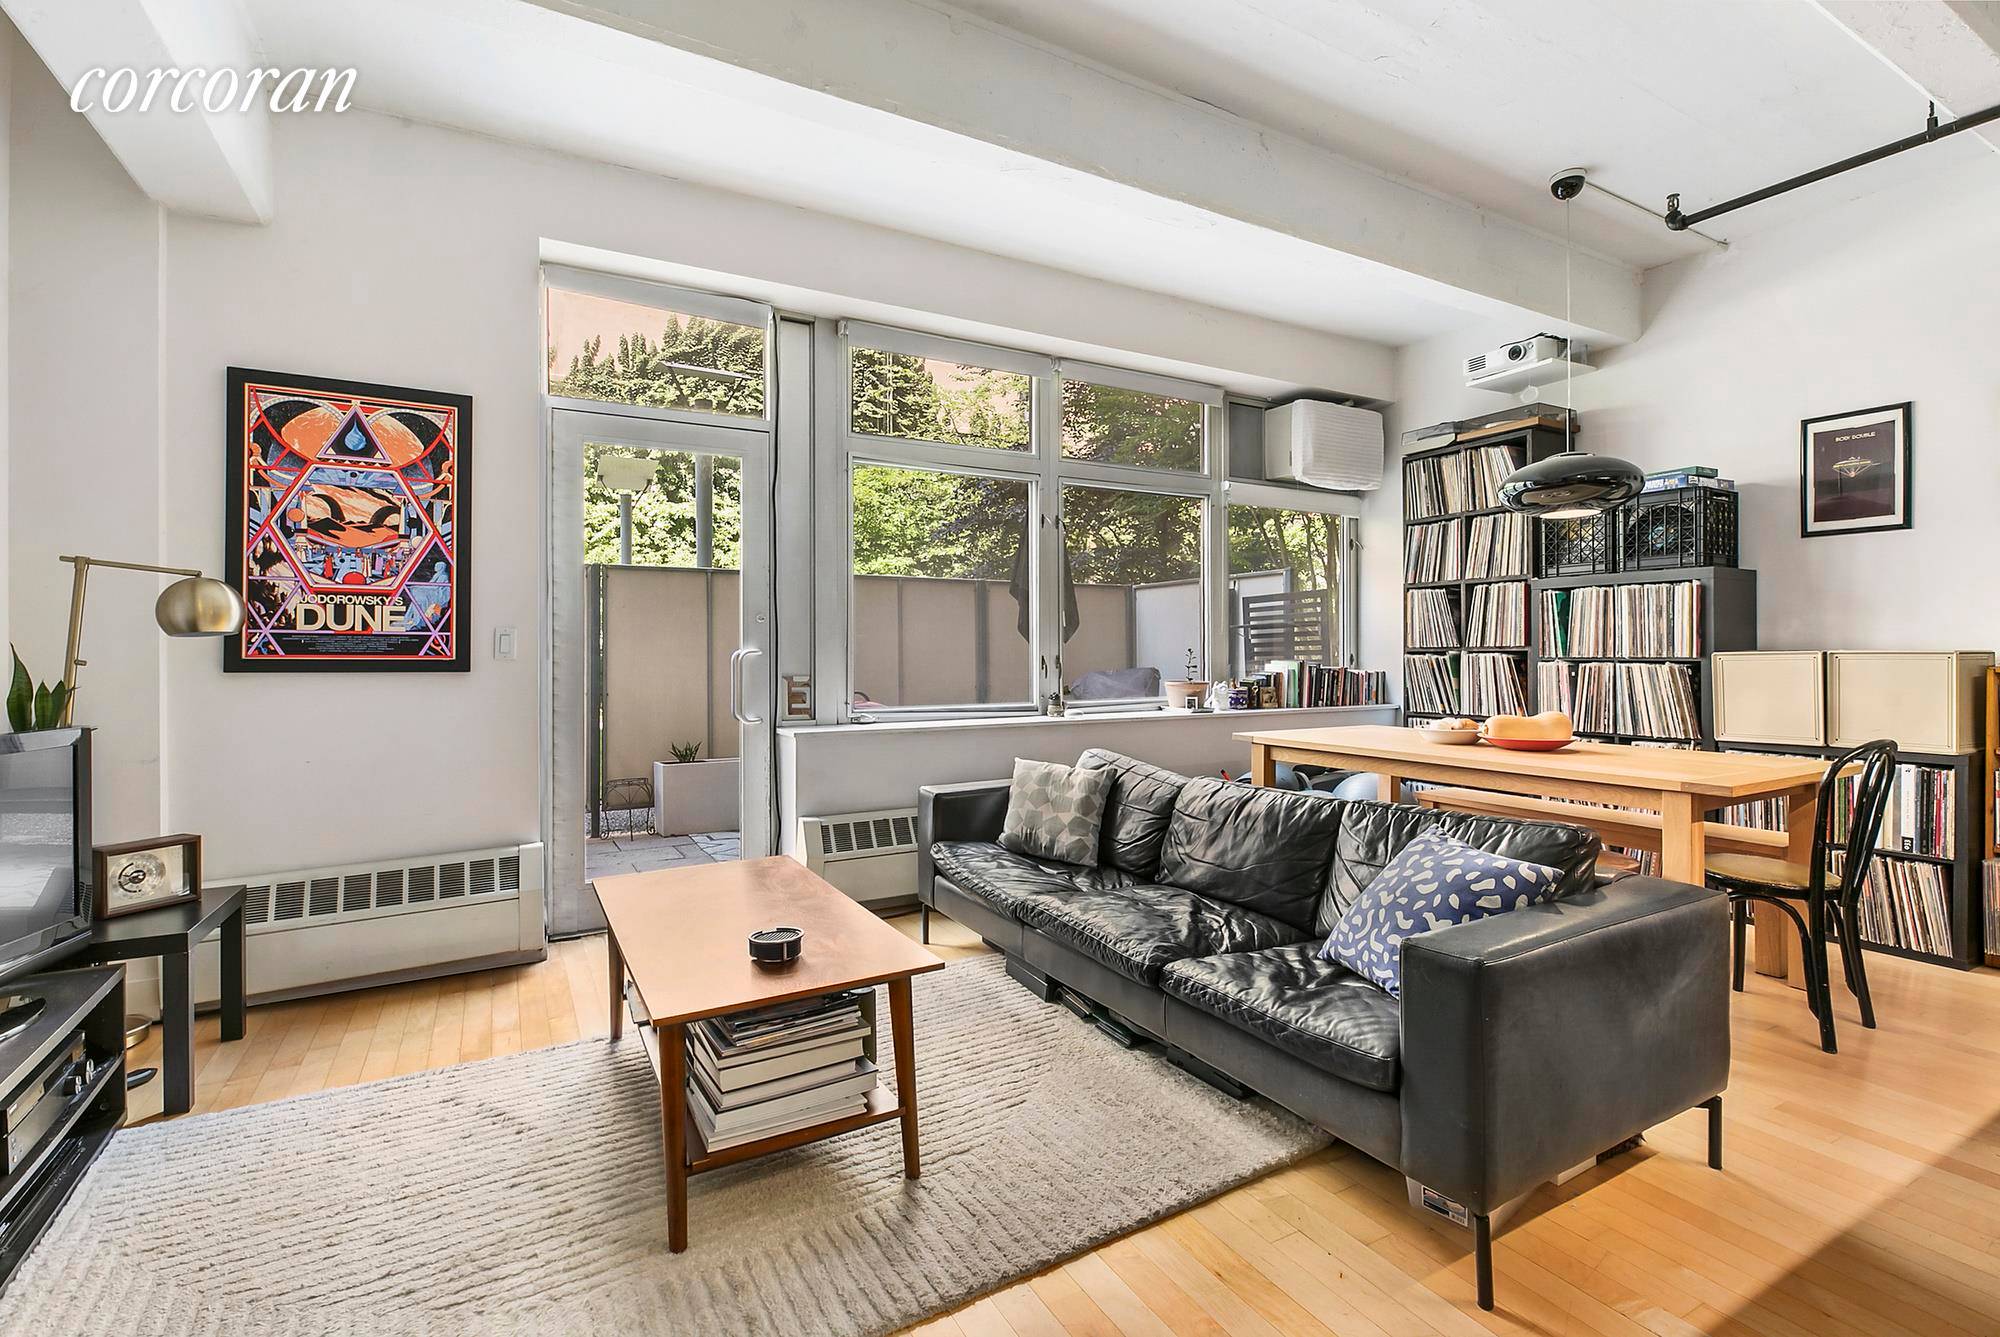 2BR 2BA LOFT WITH PRIVATE PATIO IN CLINTON HILL This lovely 2BR 2BA loft offers a large living dining area, open kitchen, and generous private patio.